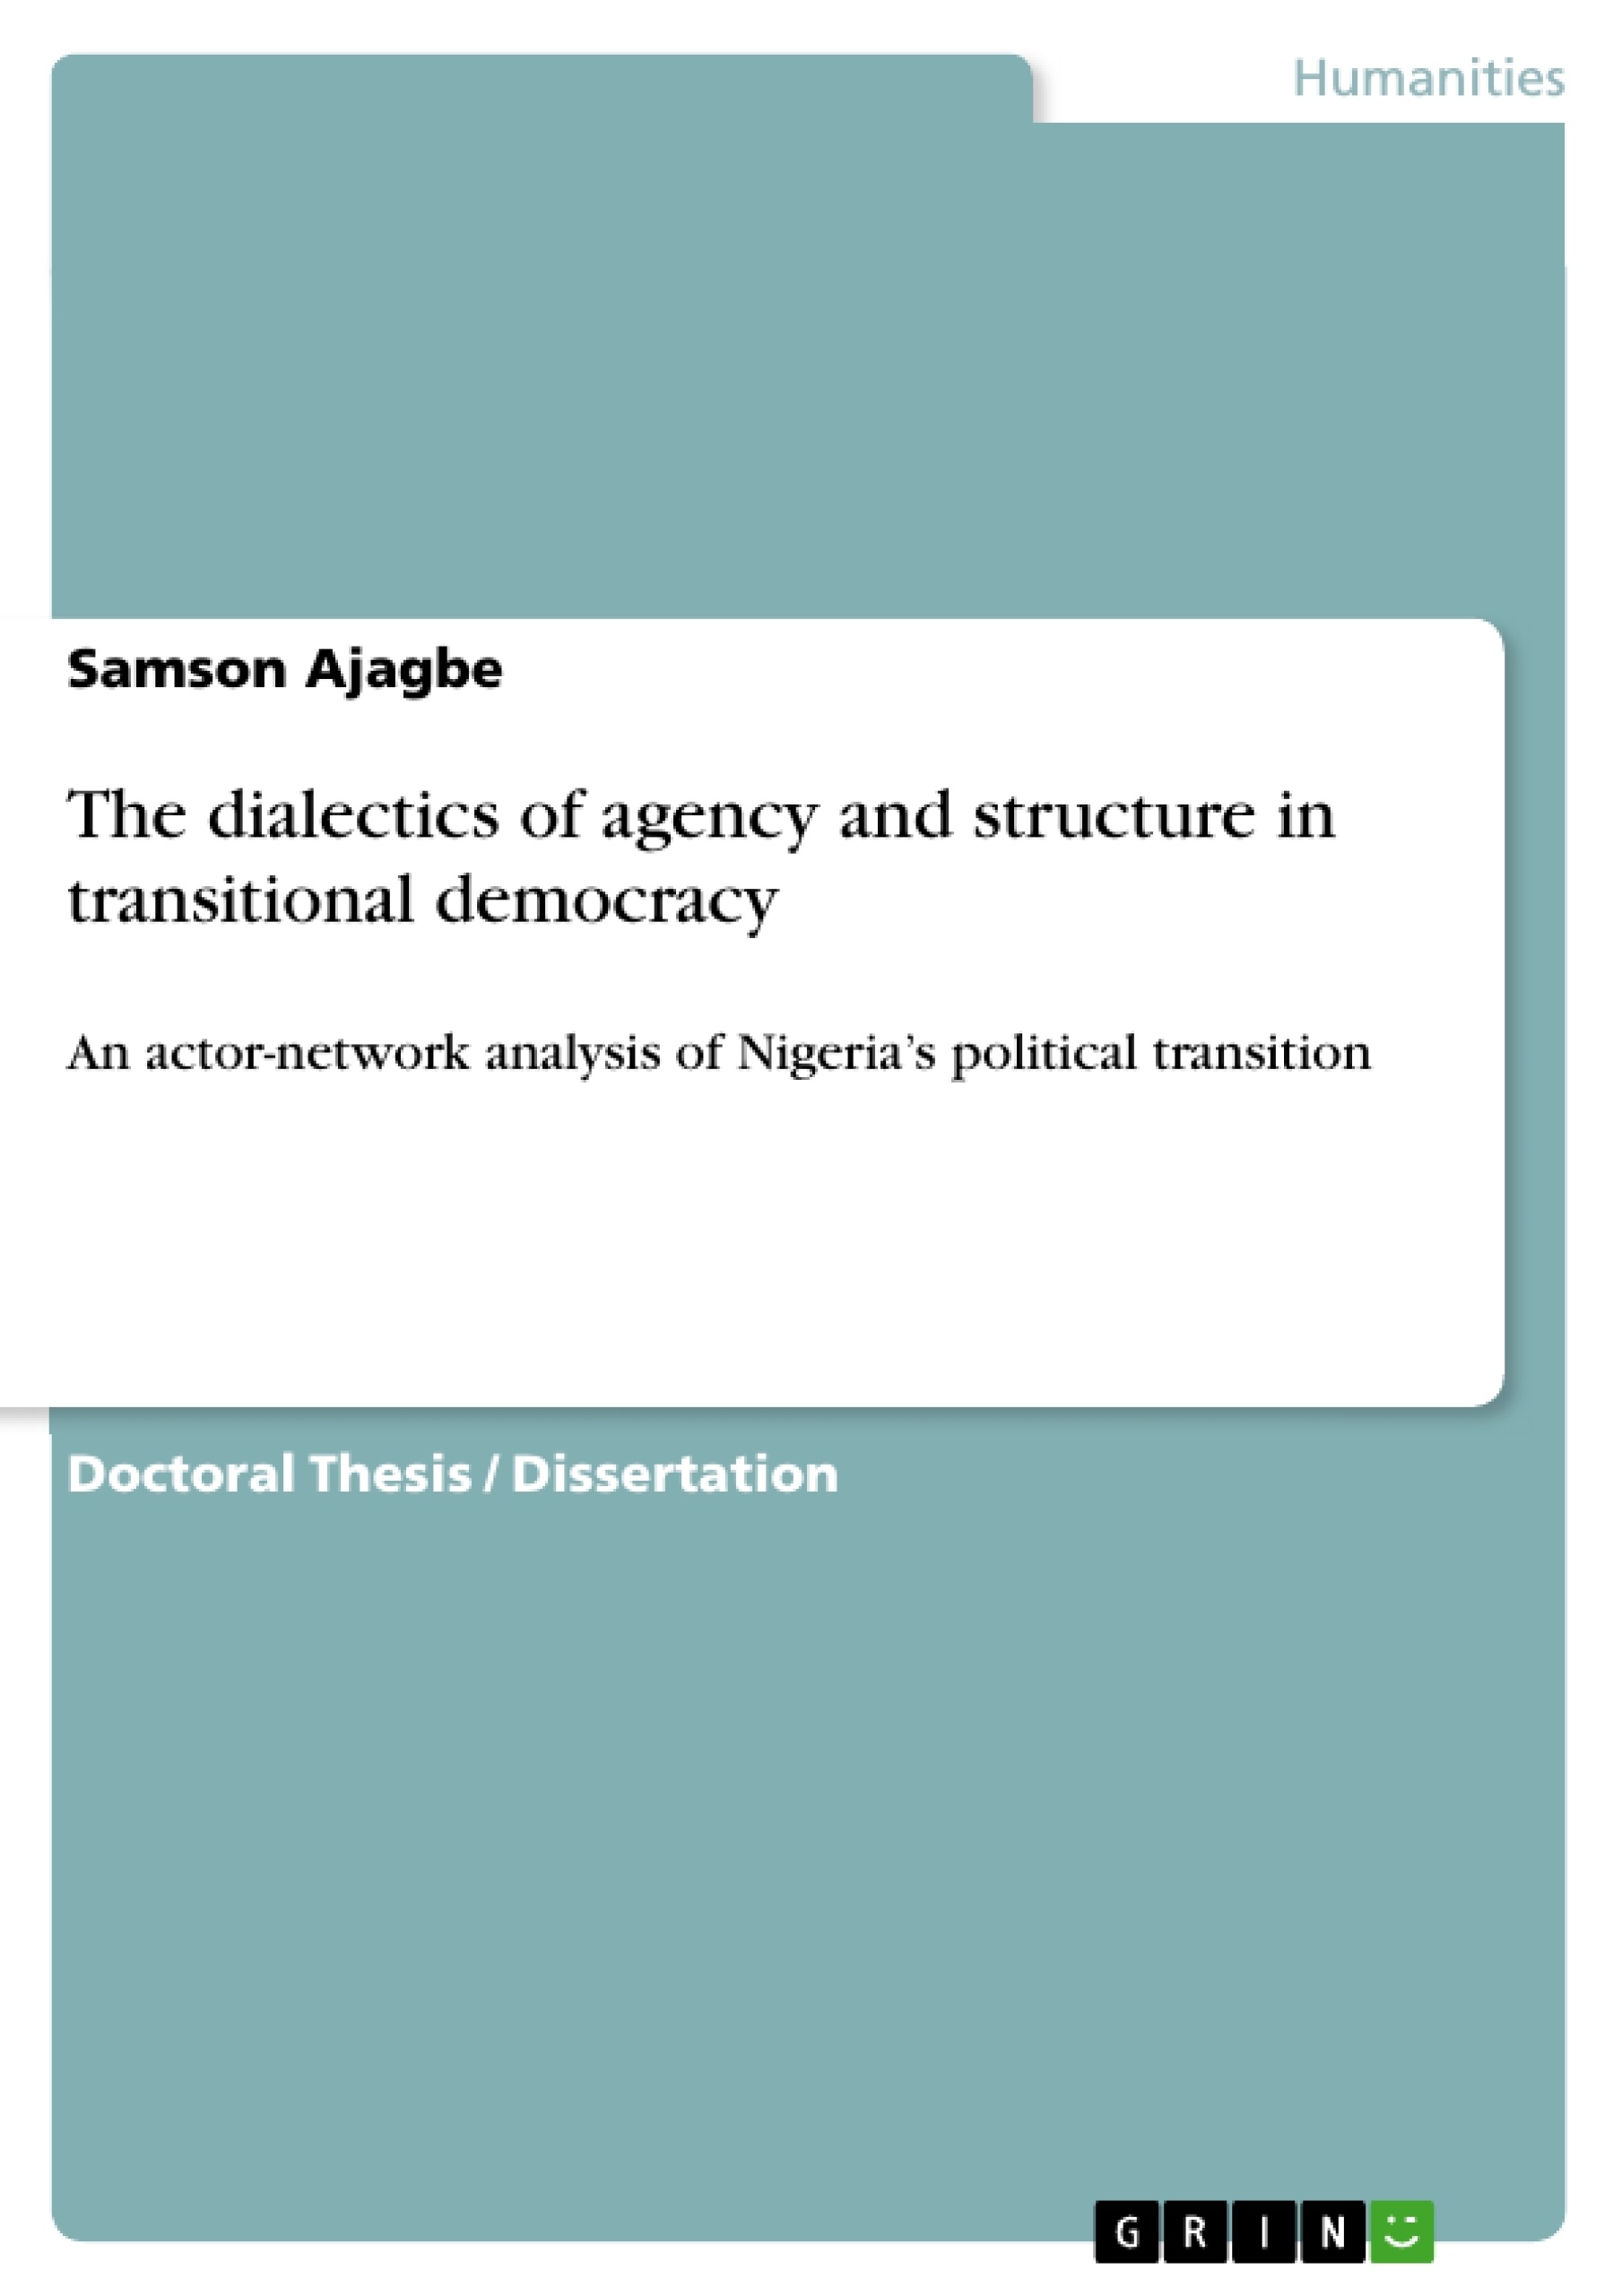 Title: The dialectics of agency and structure in transitional democracy